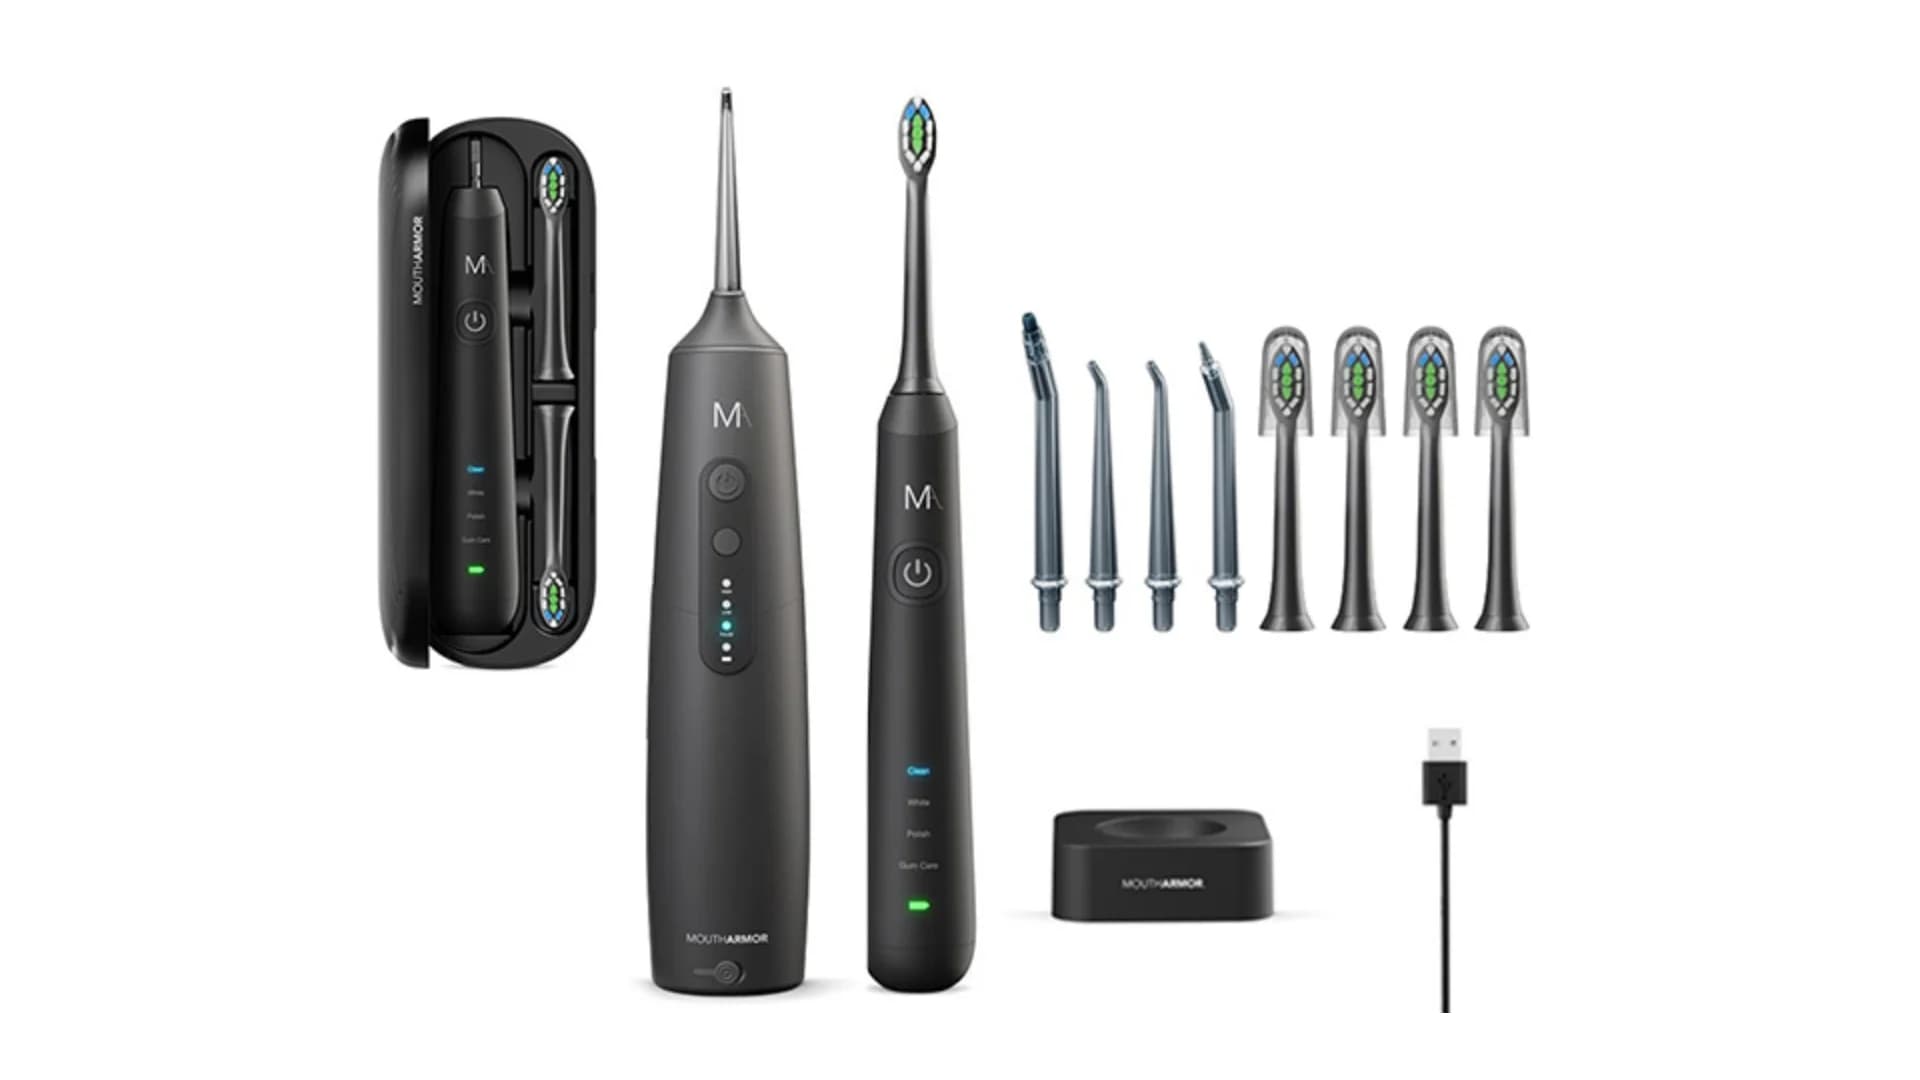 Make your next dentist visit more pleasant with this electric toothbrush and water flosser combo, on sale today